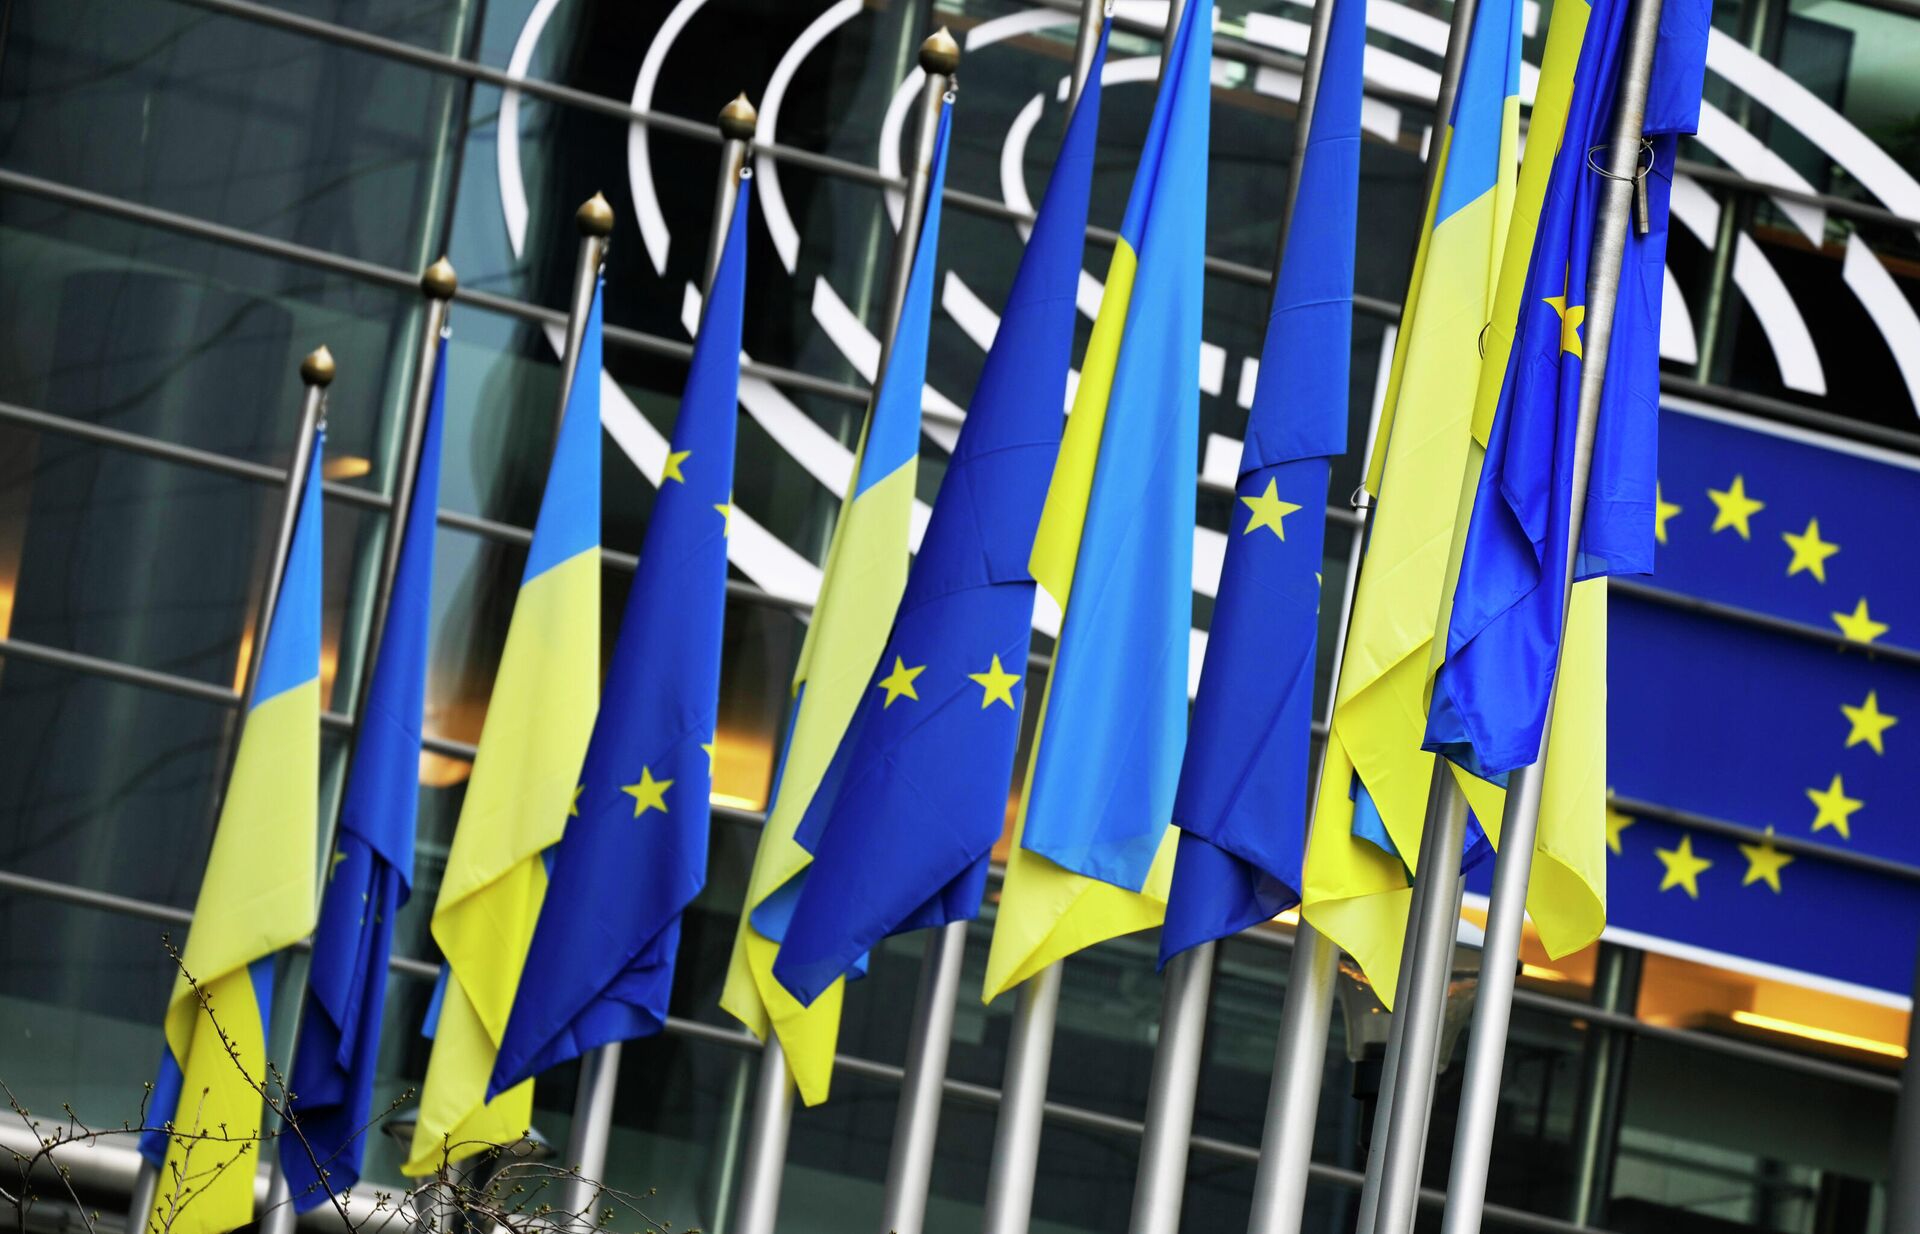 Ukraine and European Union flags hang together on the exterior of the building prior to an extraordinary plenary session on Ukraine at the European Parliament in Brussels, Tuesday, March 1, 2022 - Sputnik International, 1920, 24.03.2022